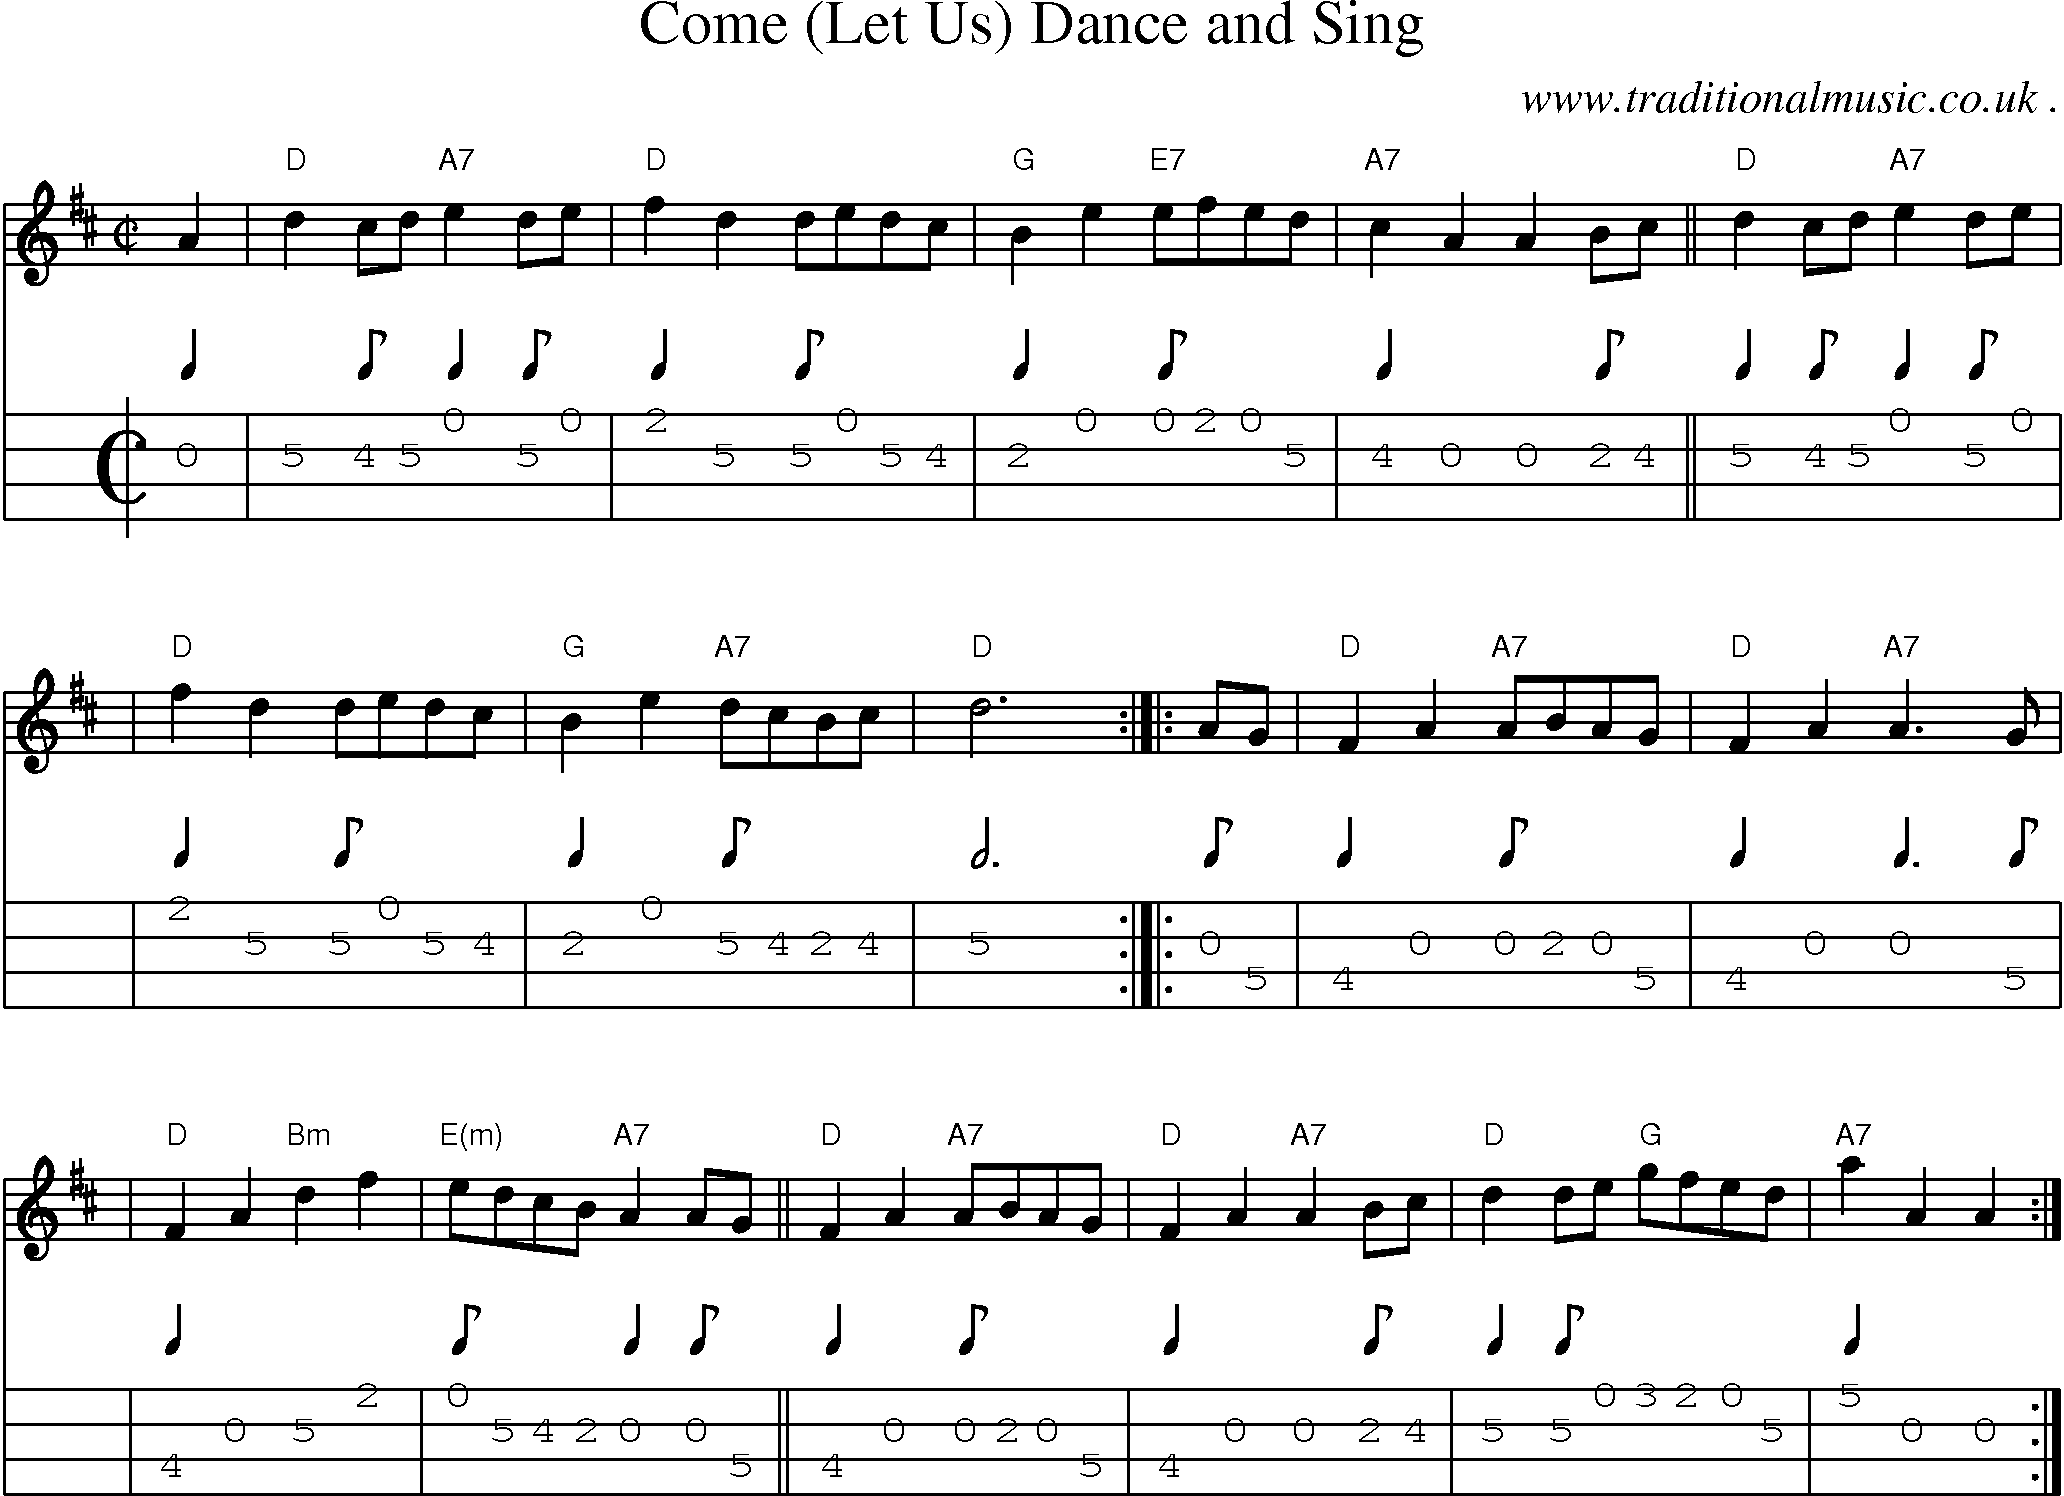 Sheet-music  score, Chords and Mandolin Tabs for Come Let Us Dance And Sing